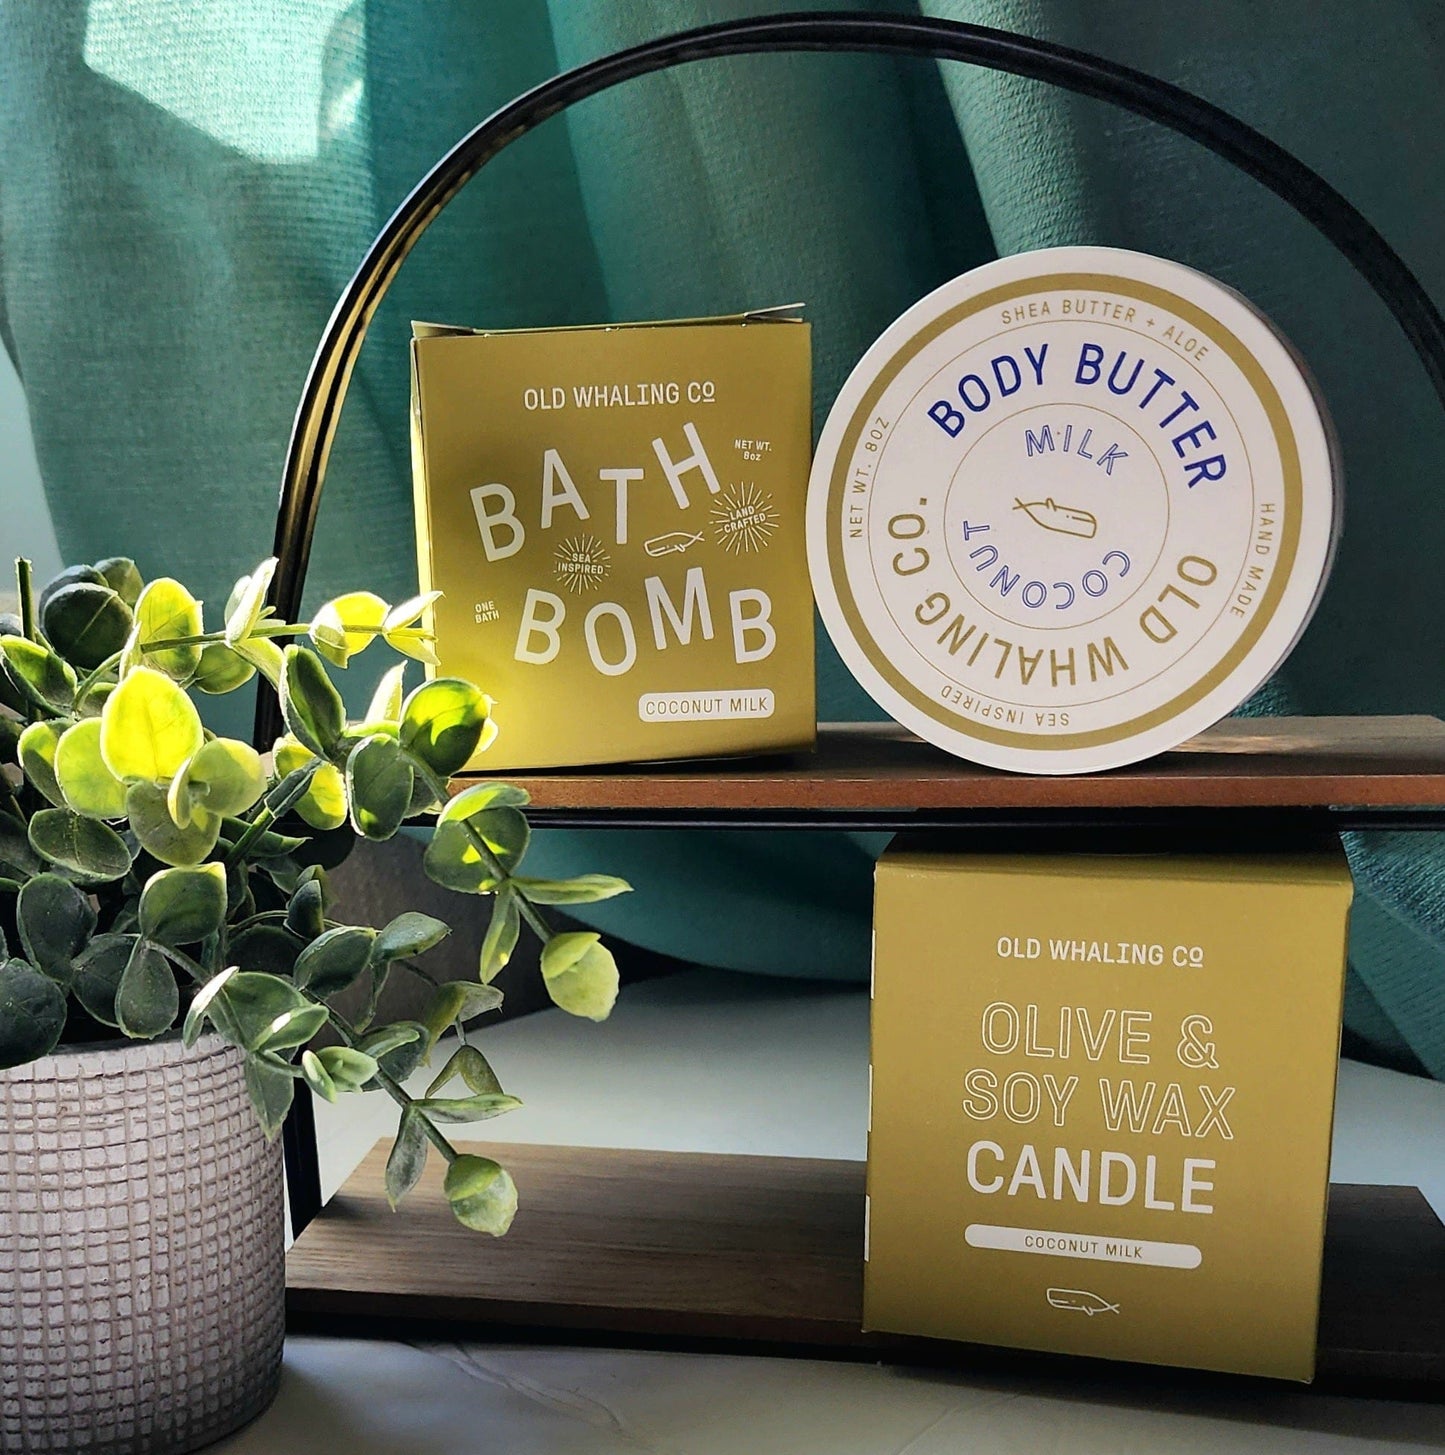 Old Whaling Company Bath & Body Bomb, Body Butter & Candle Set Press on Nails Self Care Accessories